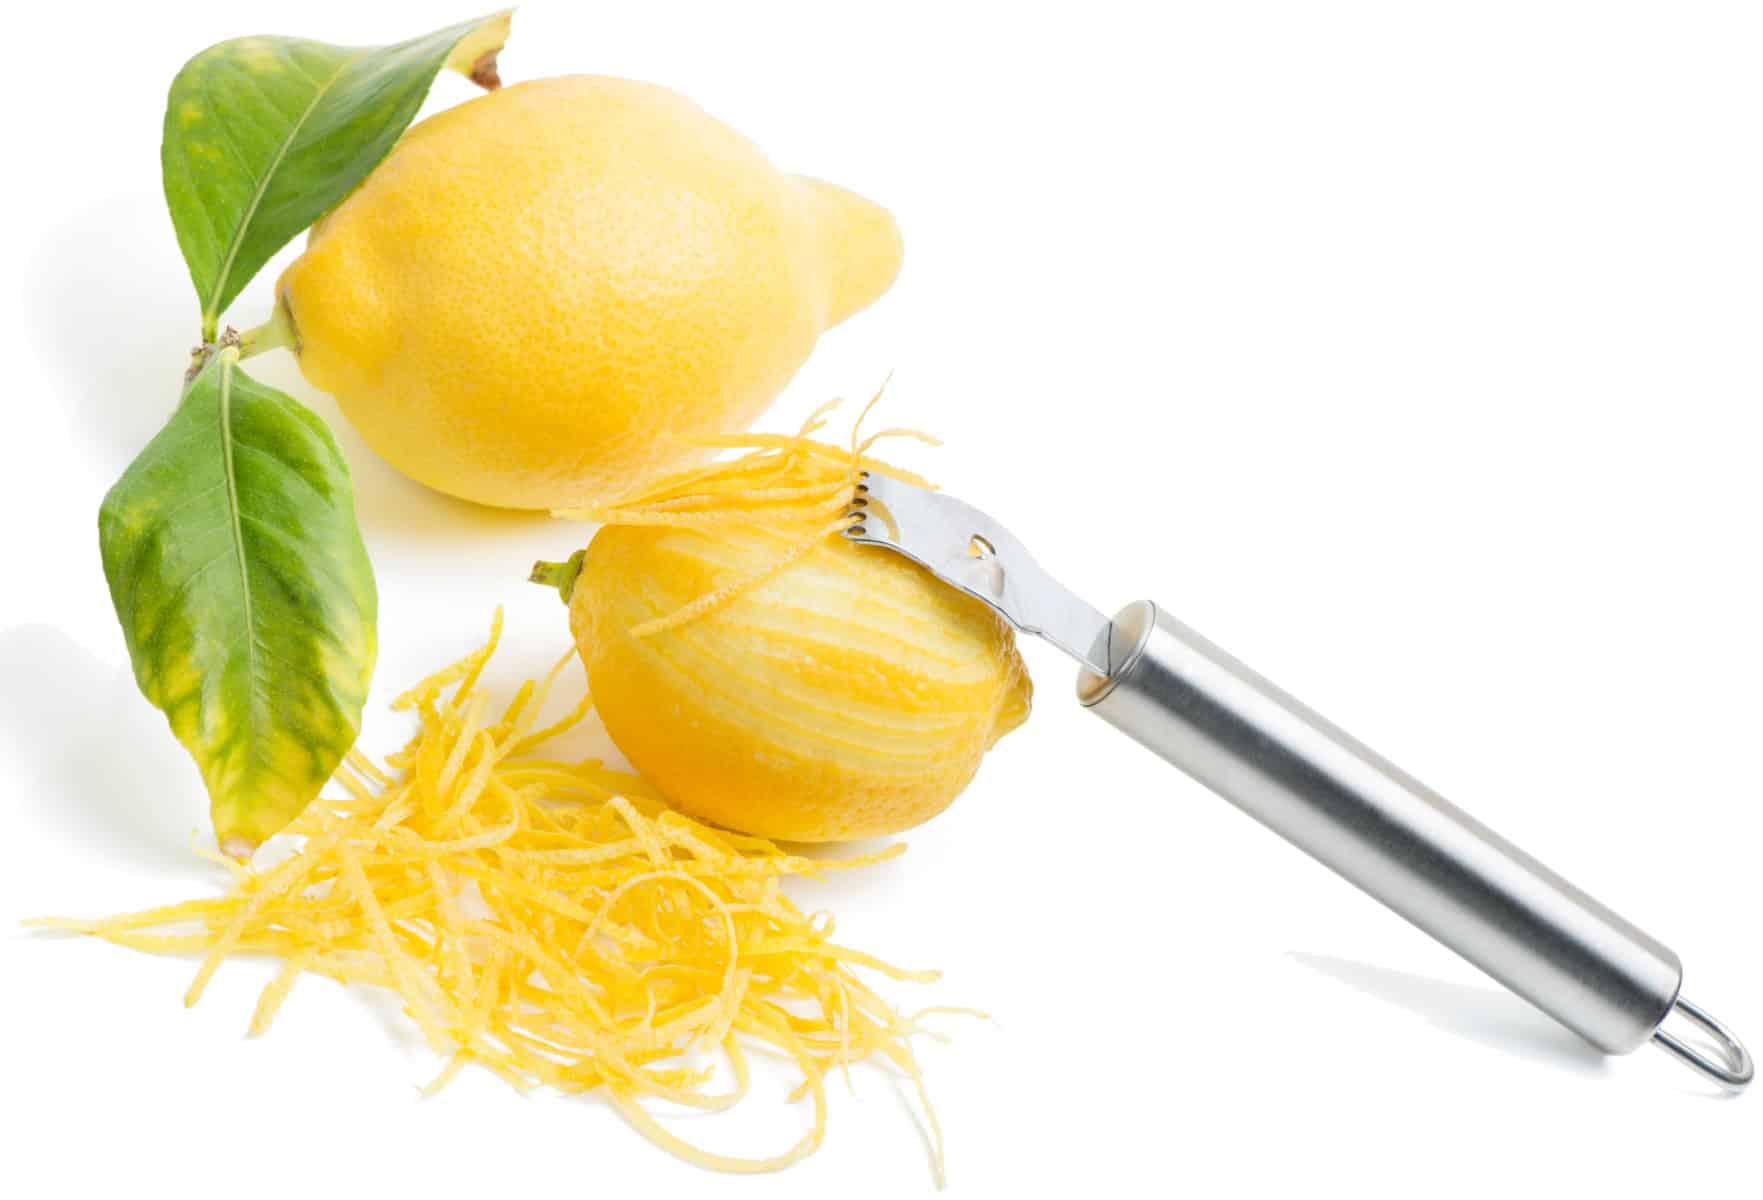 Lemon with leaves, lemon zest with zester isolated on a white background.